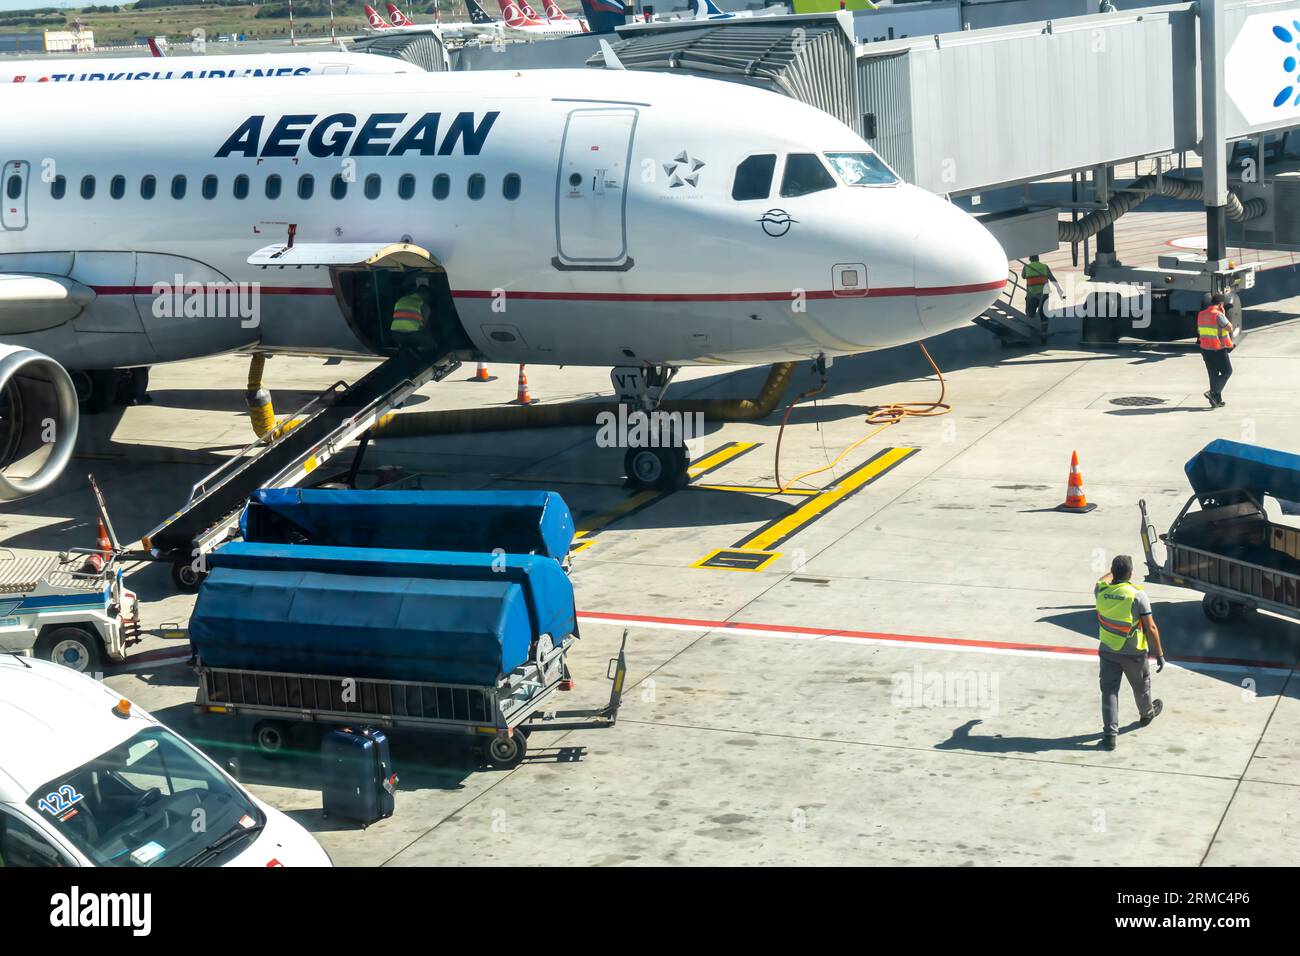 Aegean airlines plane on tarmac in Istanbul Airport Stock Photo